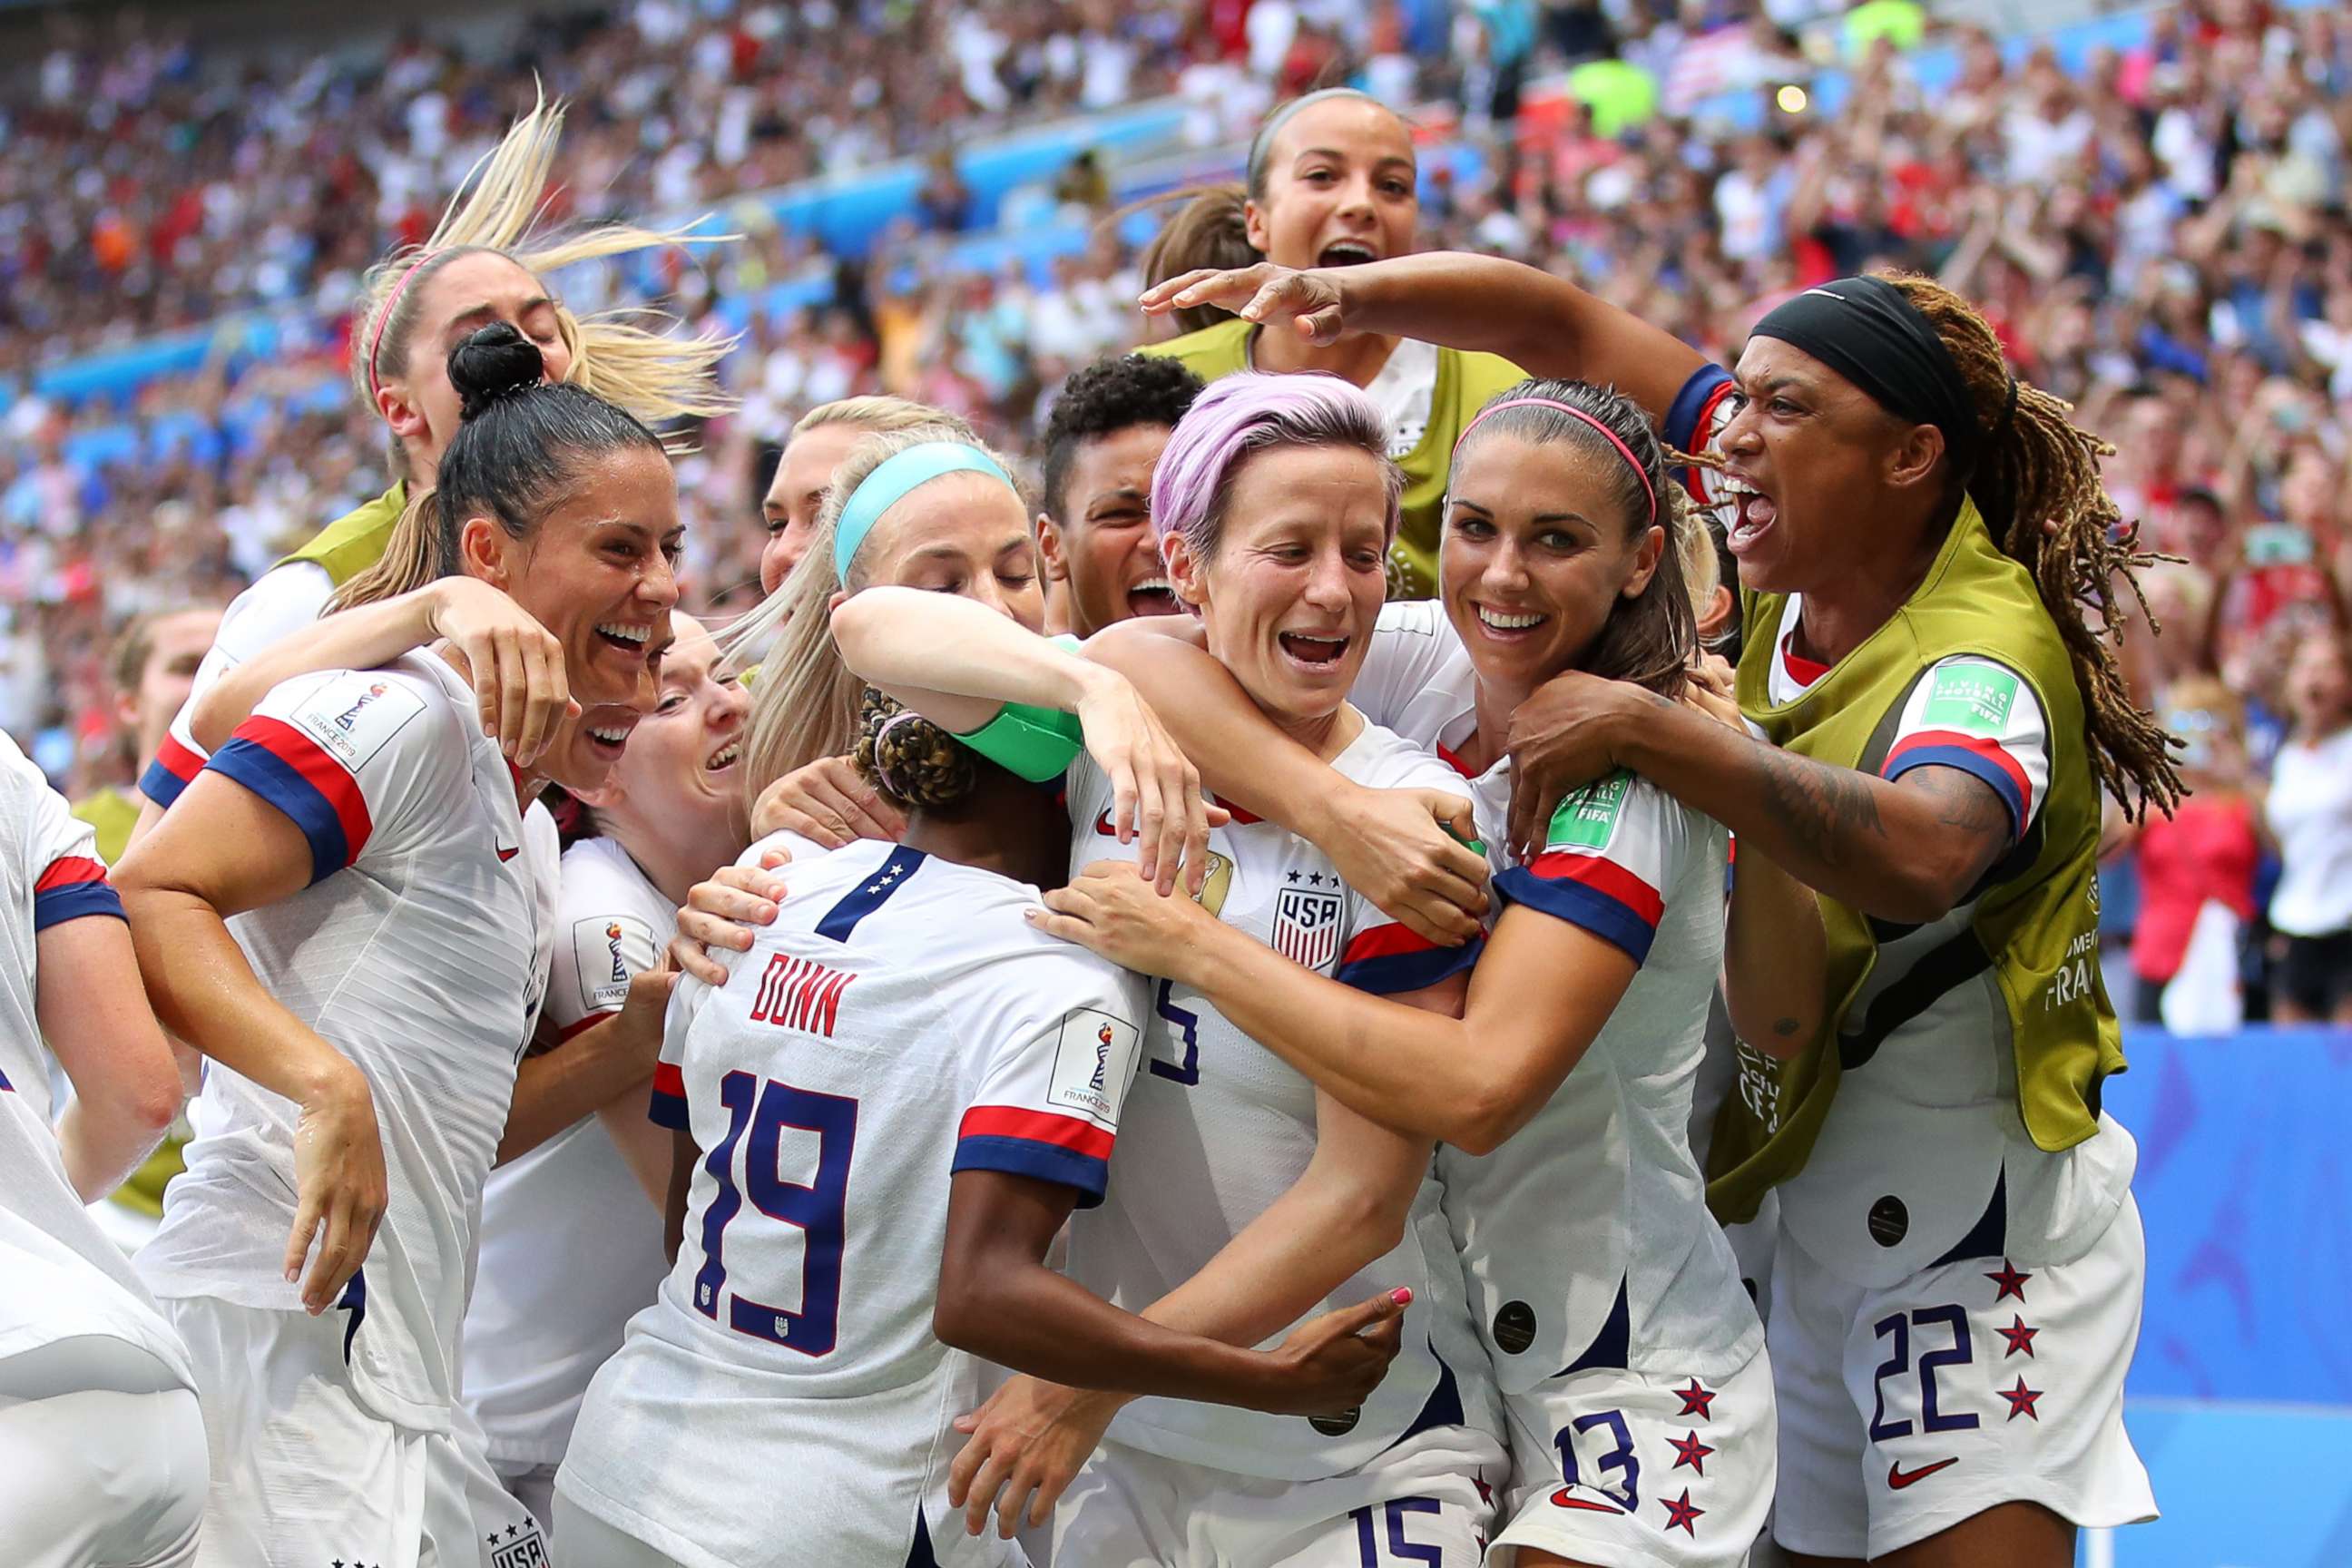 PHOTO: Megan Rapinoe of TEAM USA celebrates with teammates after scoring her team's first goal during the 2019 FIFA Women's World Cup France final between The U.S. and the Netherlands at Stade de Lyon on July 07, 2019 in Lyon, France.